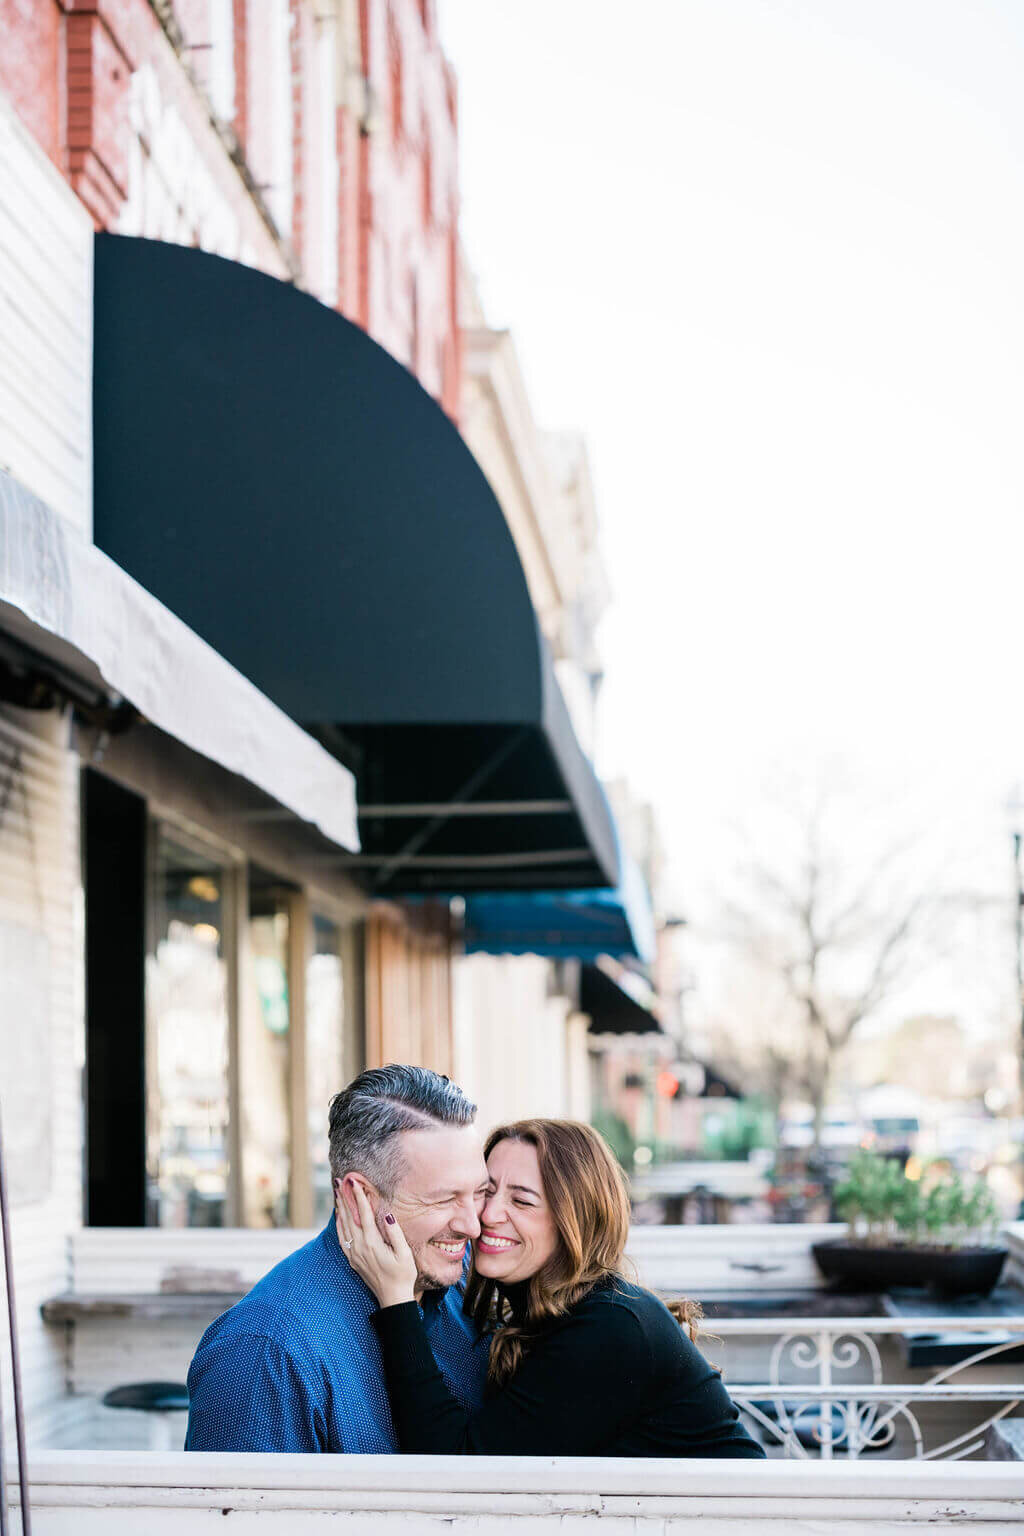 Thalita & Taylor’s Engagement session in Dallas Fort Worth Texas